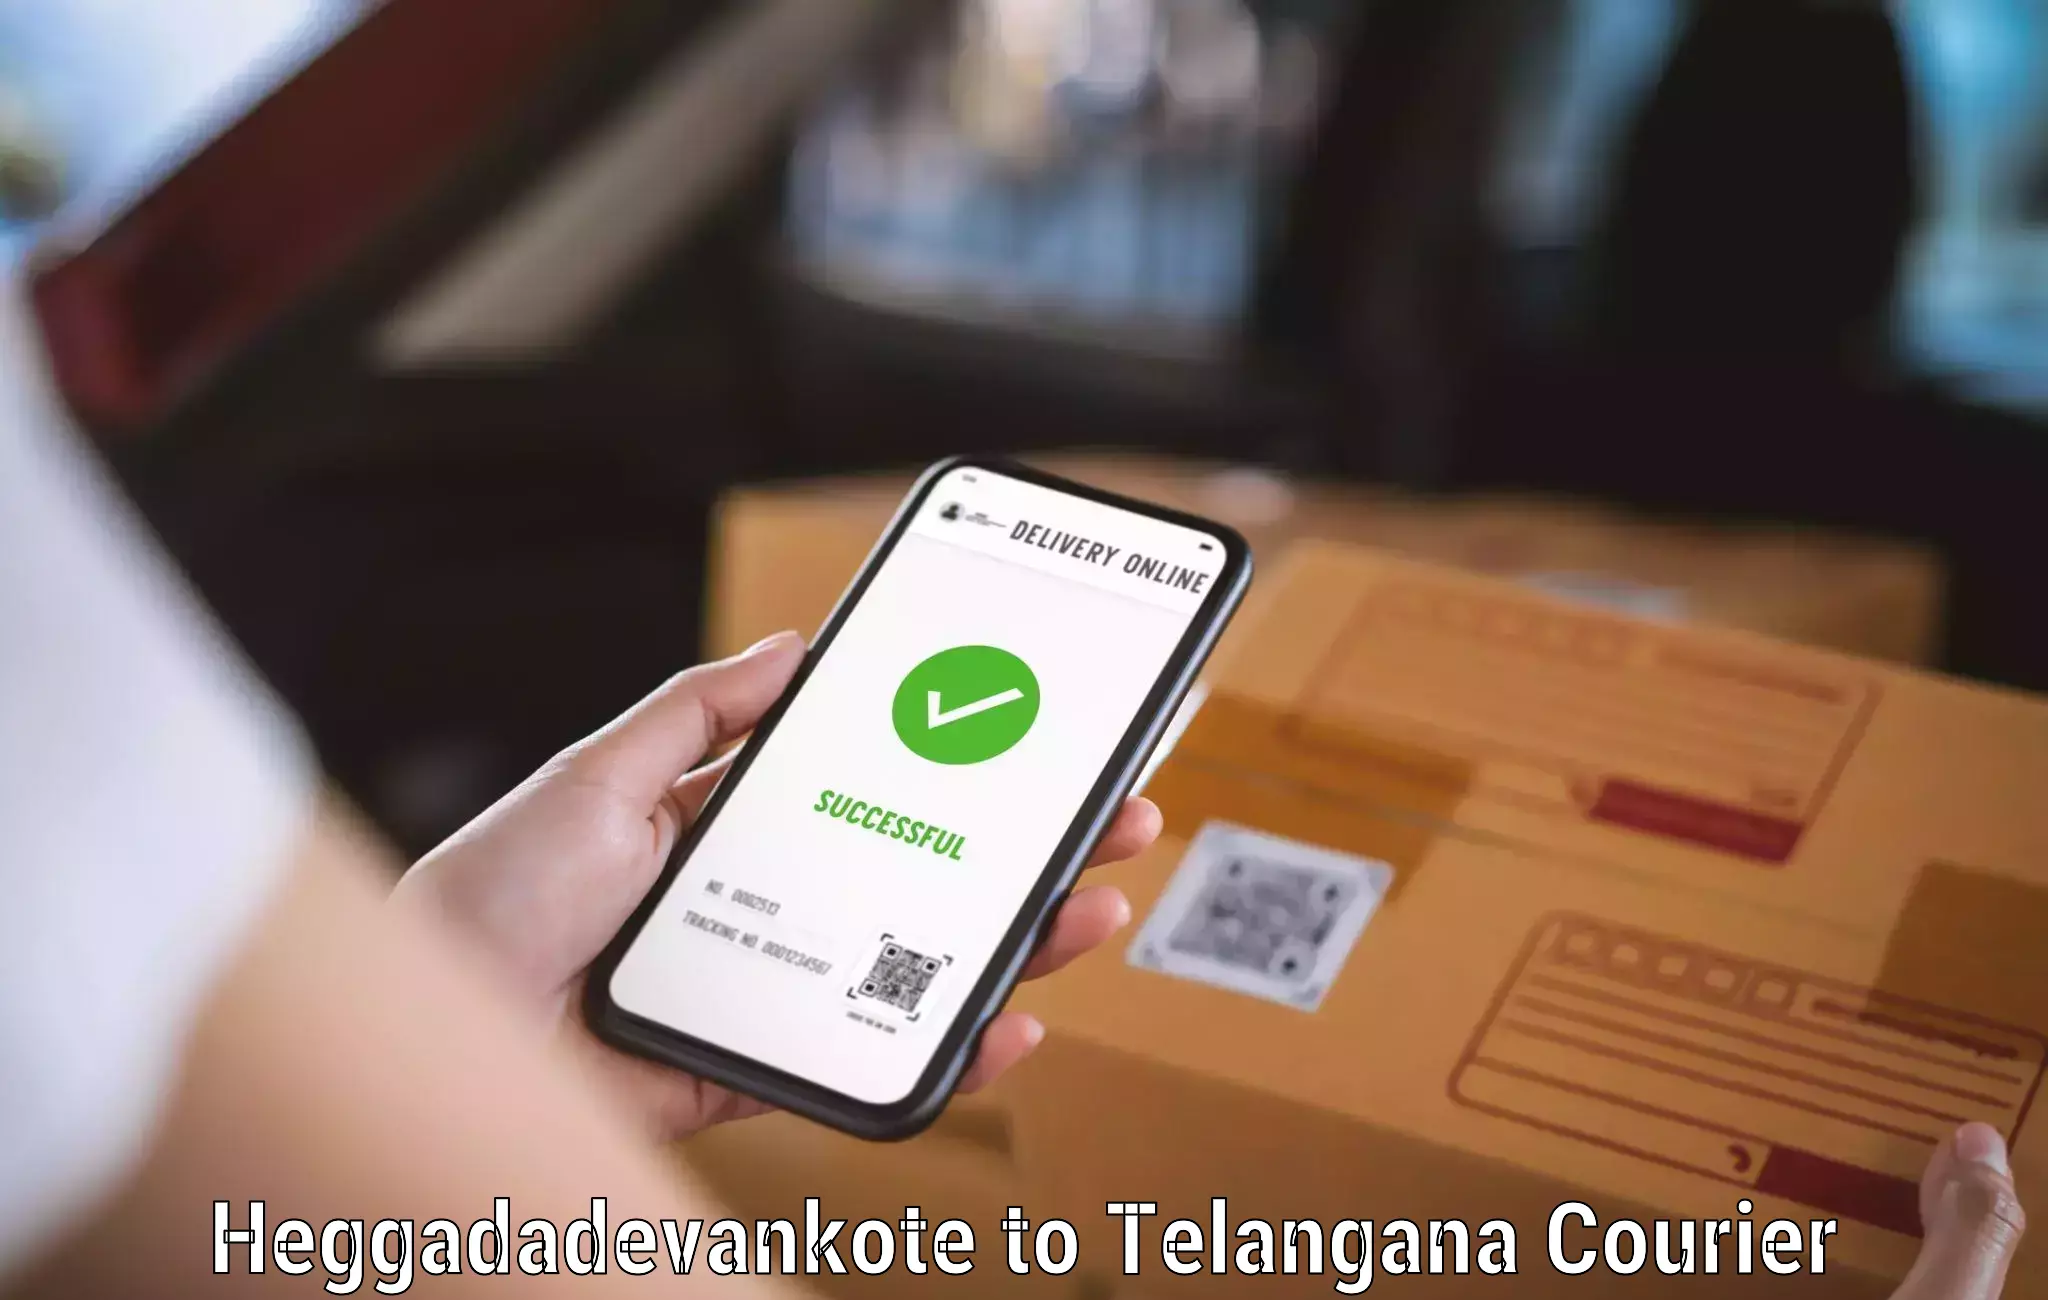 Nationwide courier service Heggadadevankote to Trimulgherry